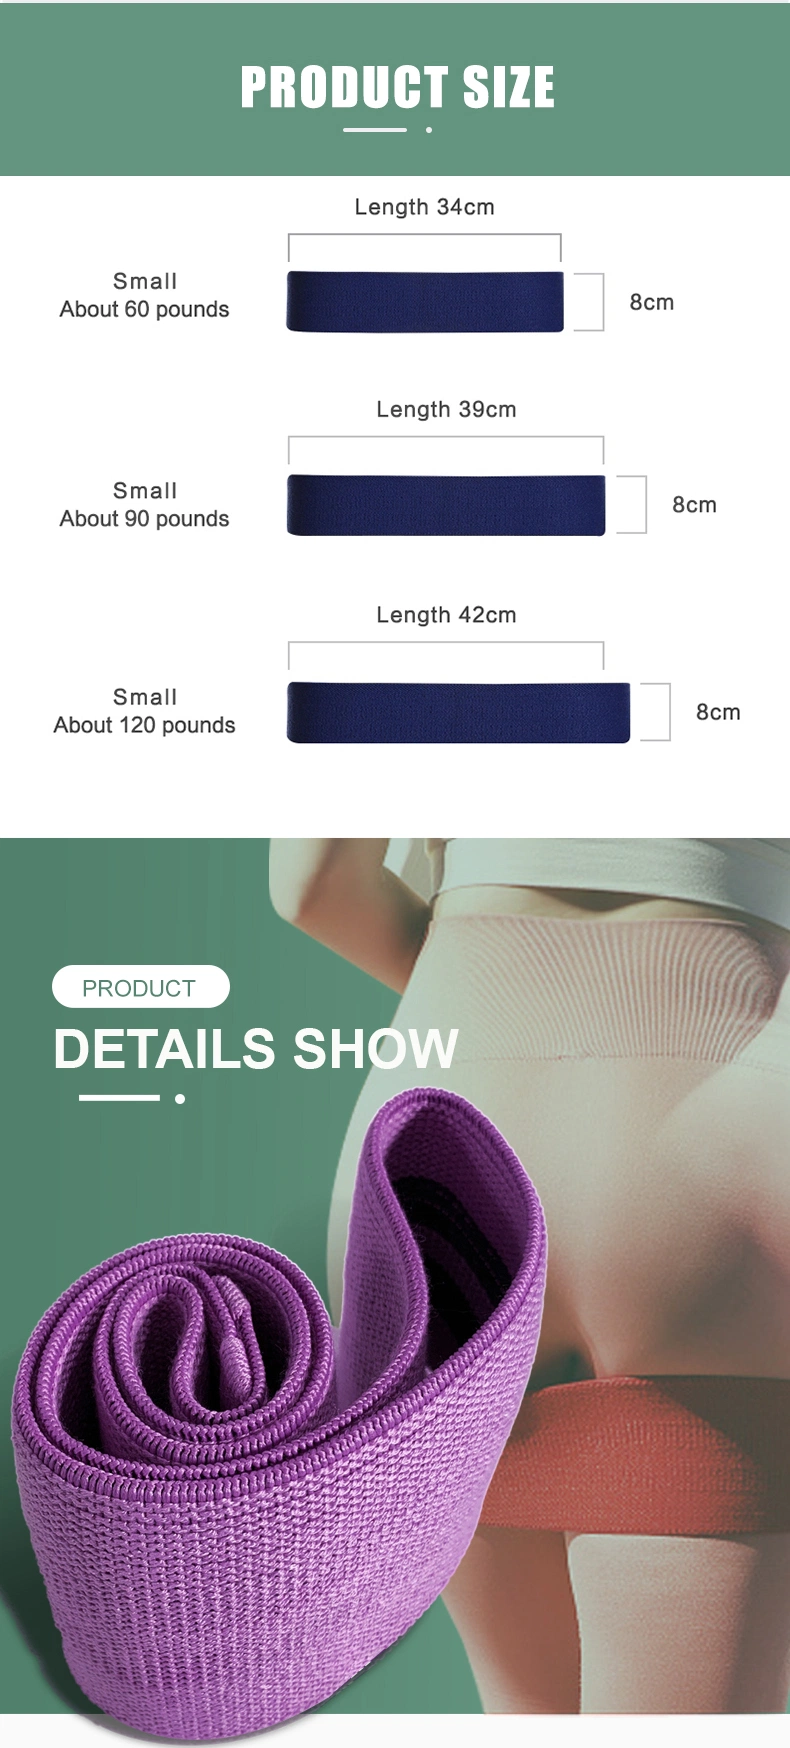 Fabric Resistance Loop Exercise Bands Set Non Slip Booty Workout Bands for Legs Butt Squat Glute Hip